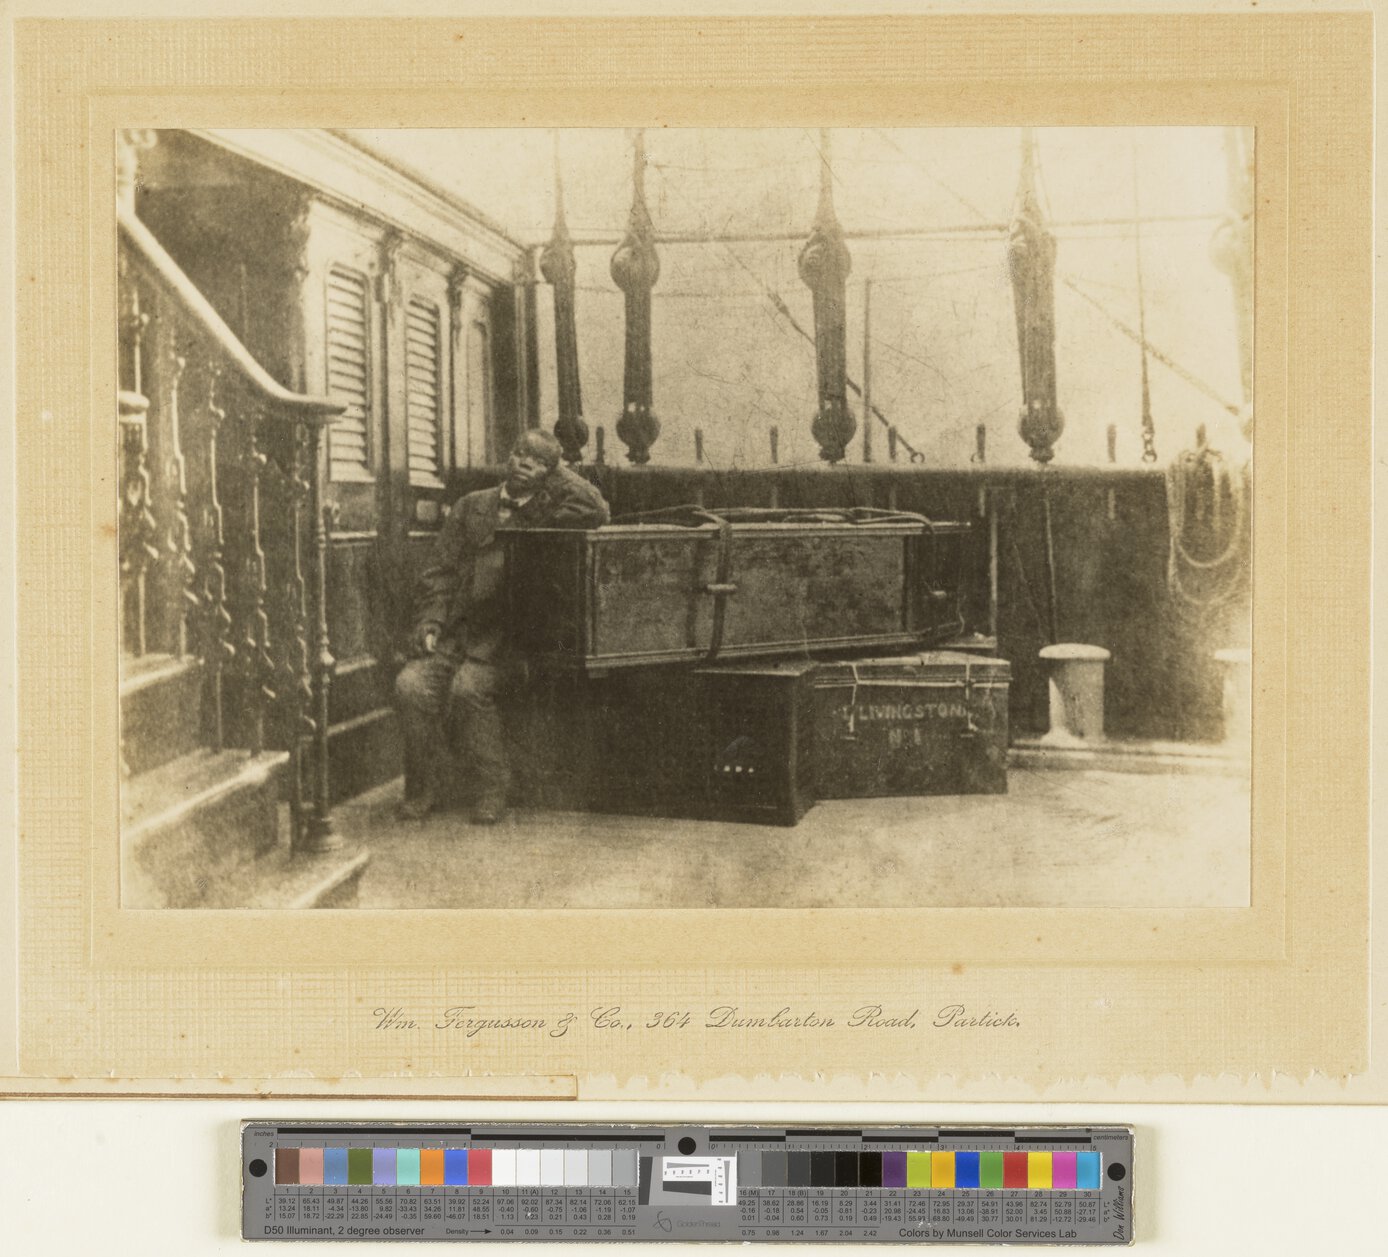 Jacob Wainwright seated on ship “Malwa,” leaning against David Livingstone’s coffin and other boxes.